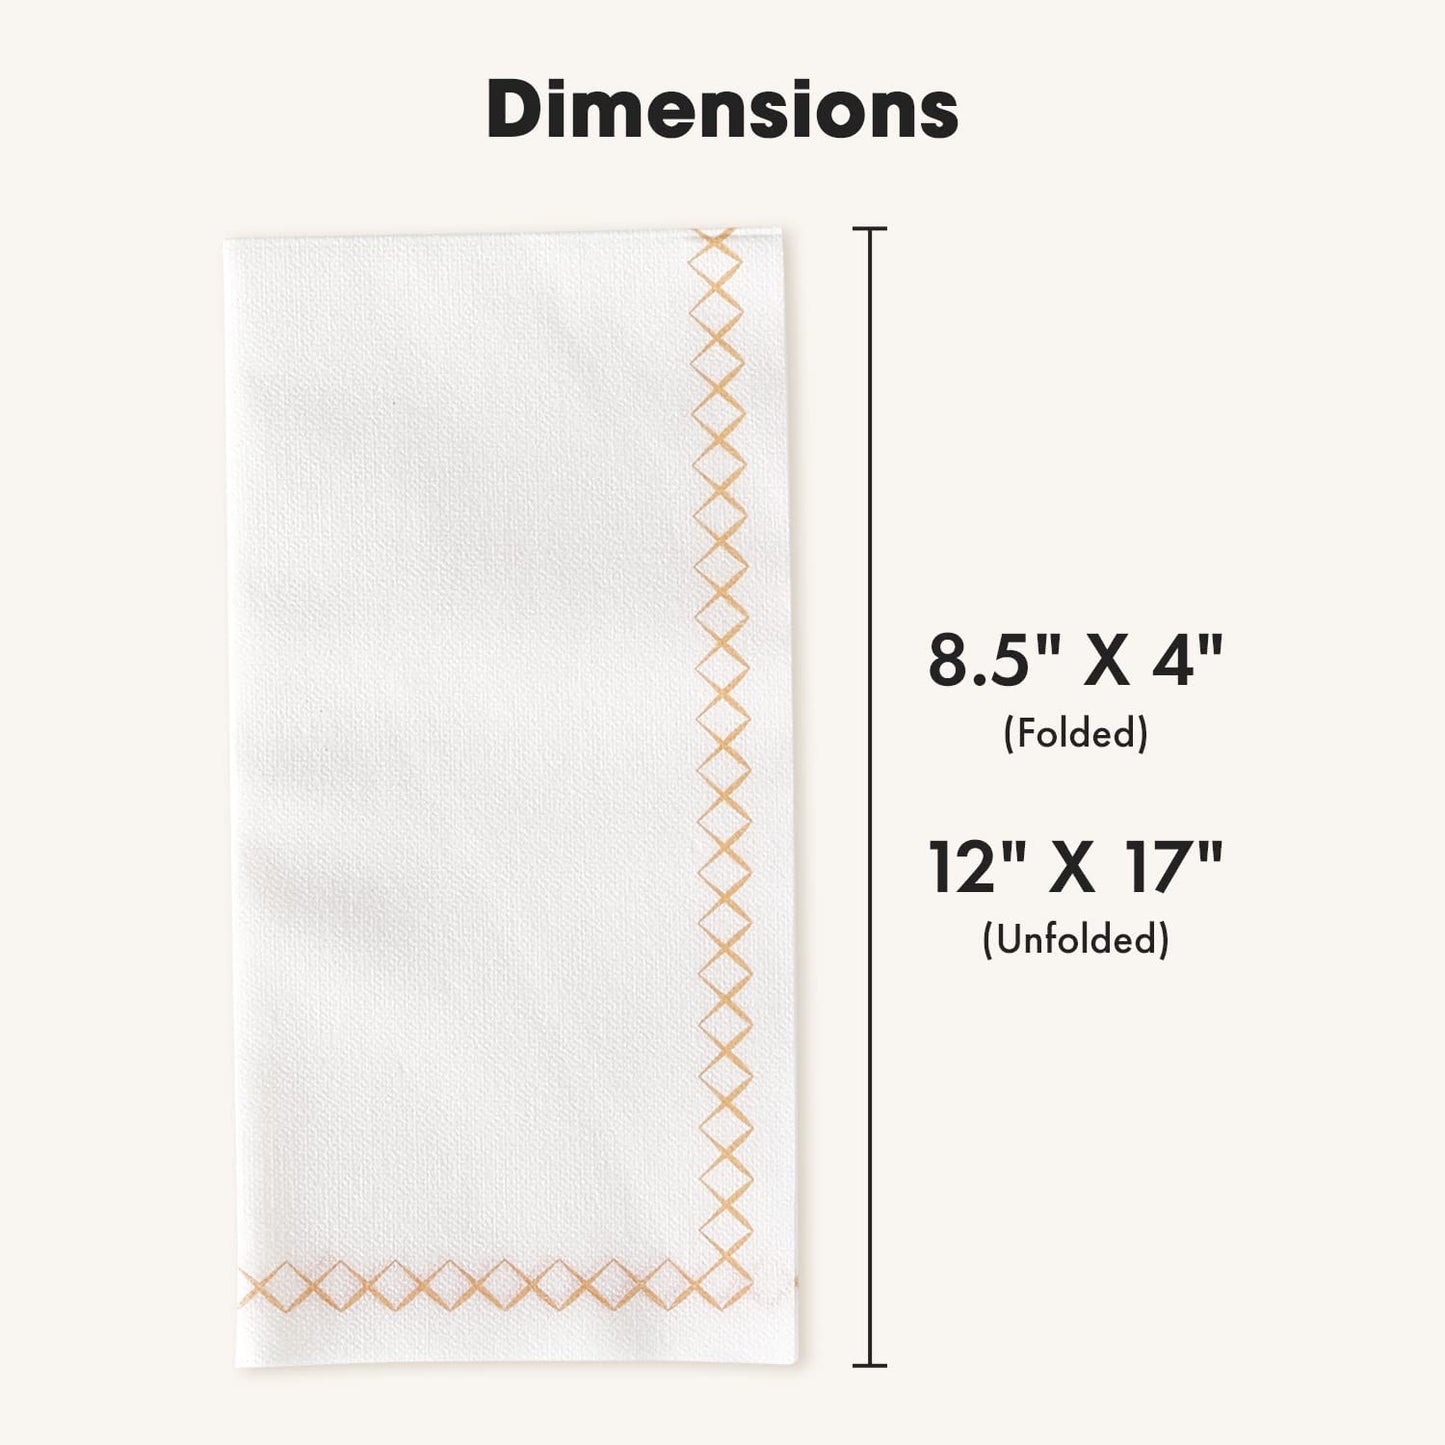 By Madee: Rose Gold Fancy Paper Napkins - Perfect Disposable Guest Hand Towels for Bathrooms